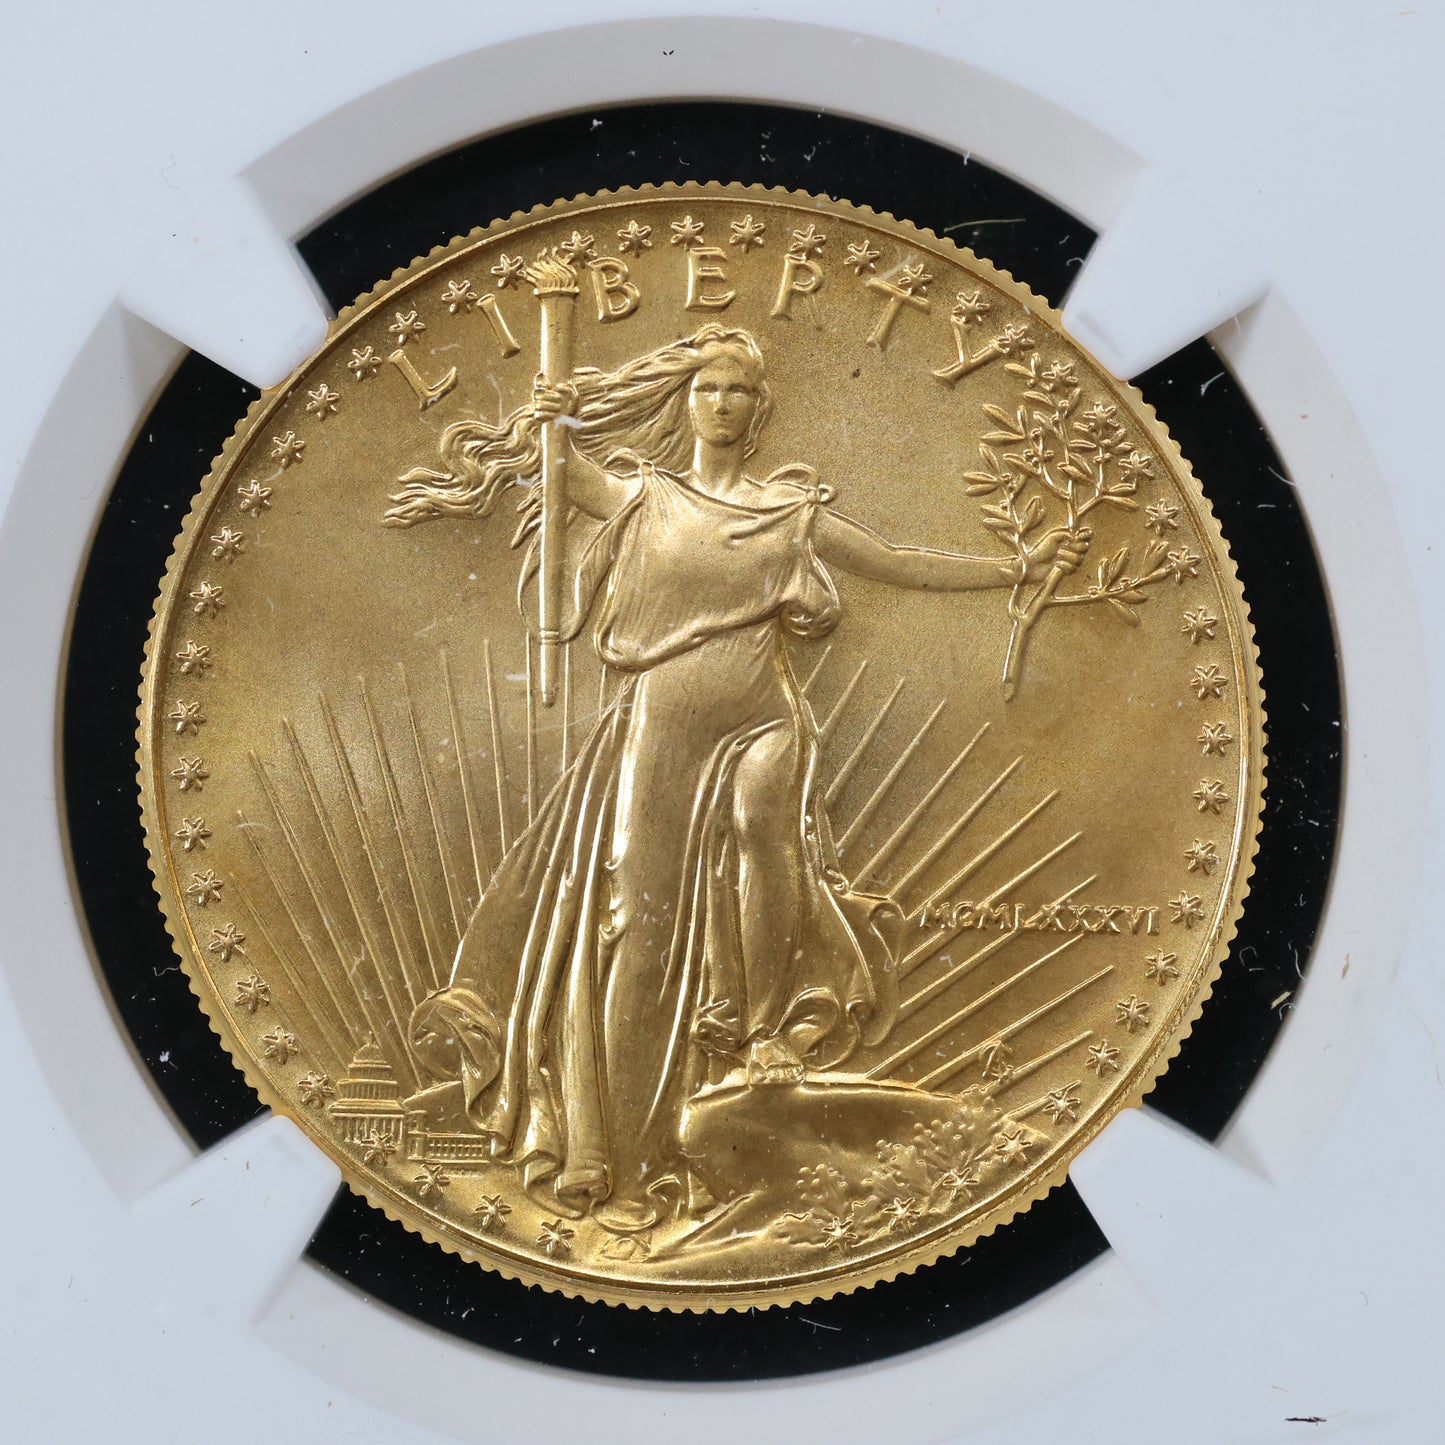 1986 1 oz Gold American Eagle 50$ Bullion Gold Coin - NGC MS 69